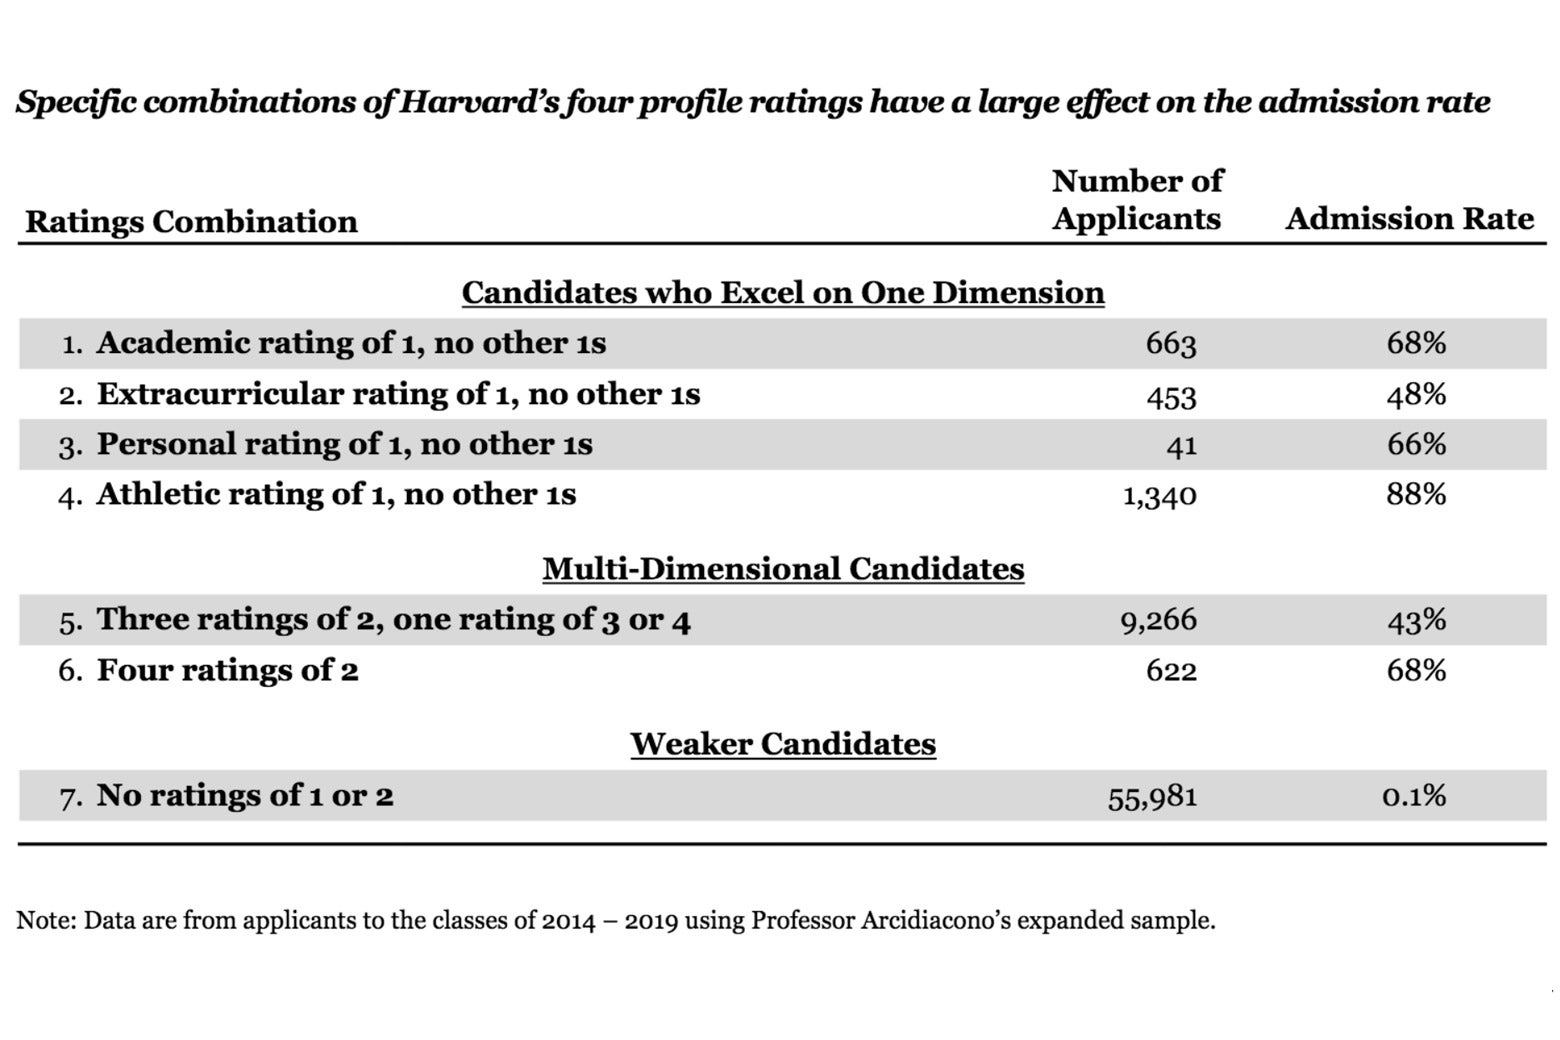 Chart of how combinations of Harvard’s four profile ratings affect the admissions rate.